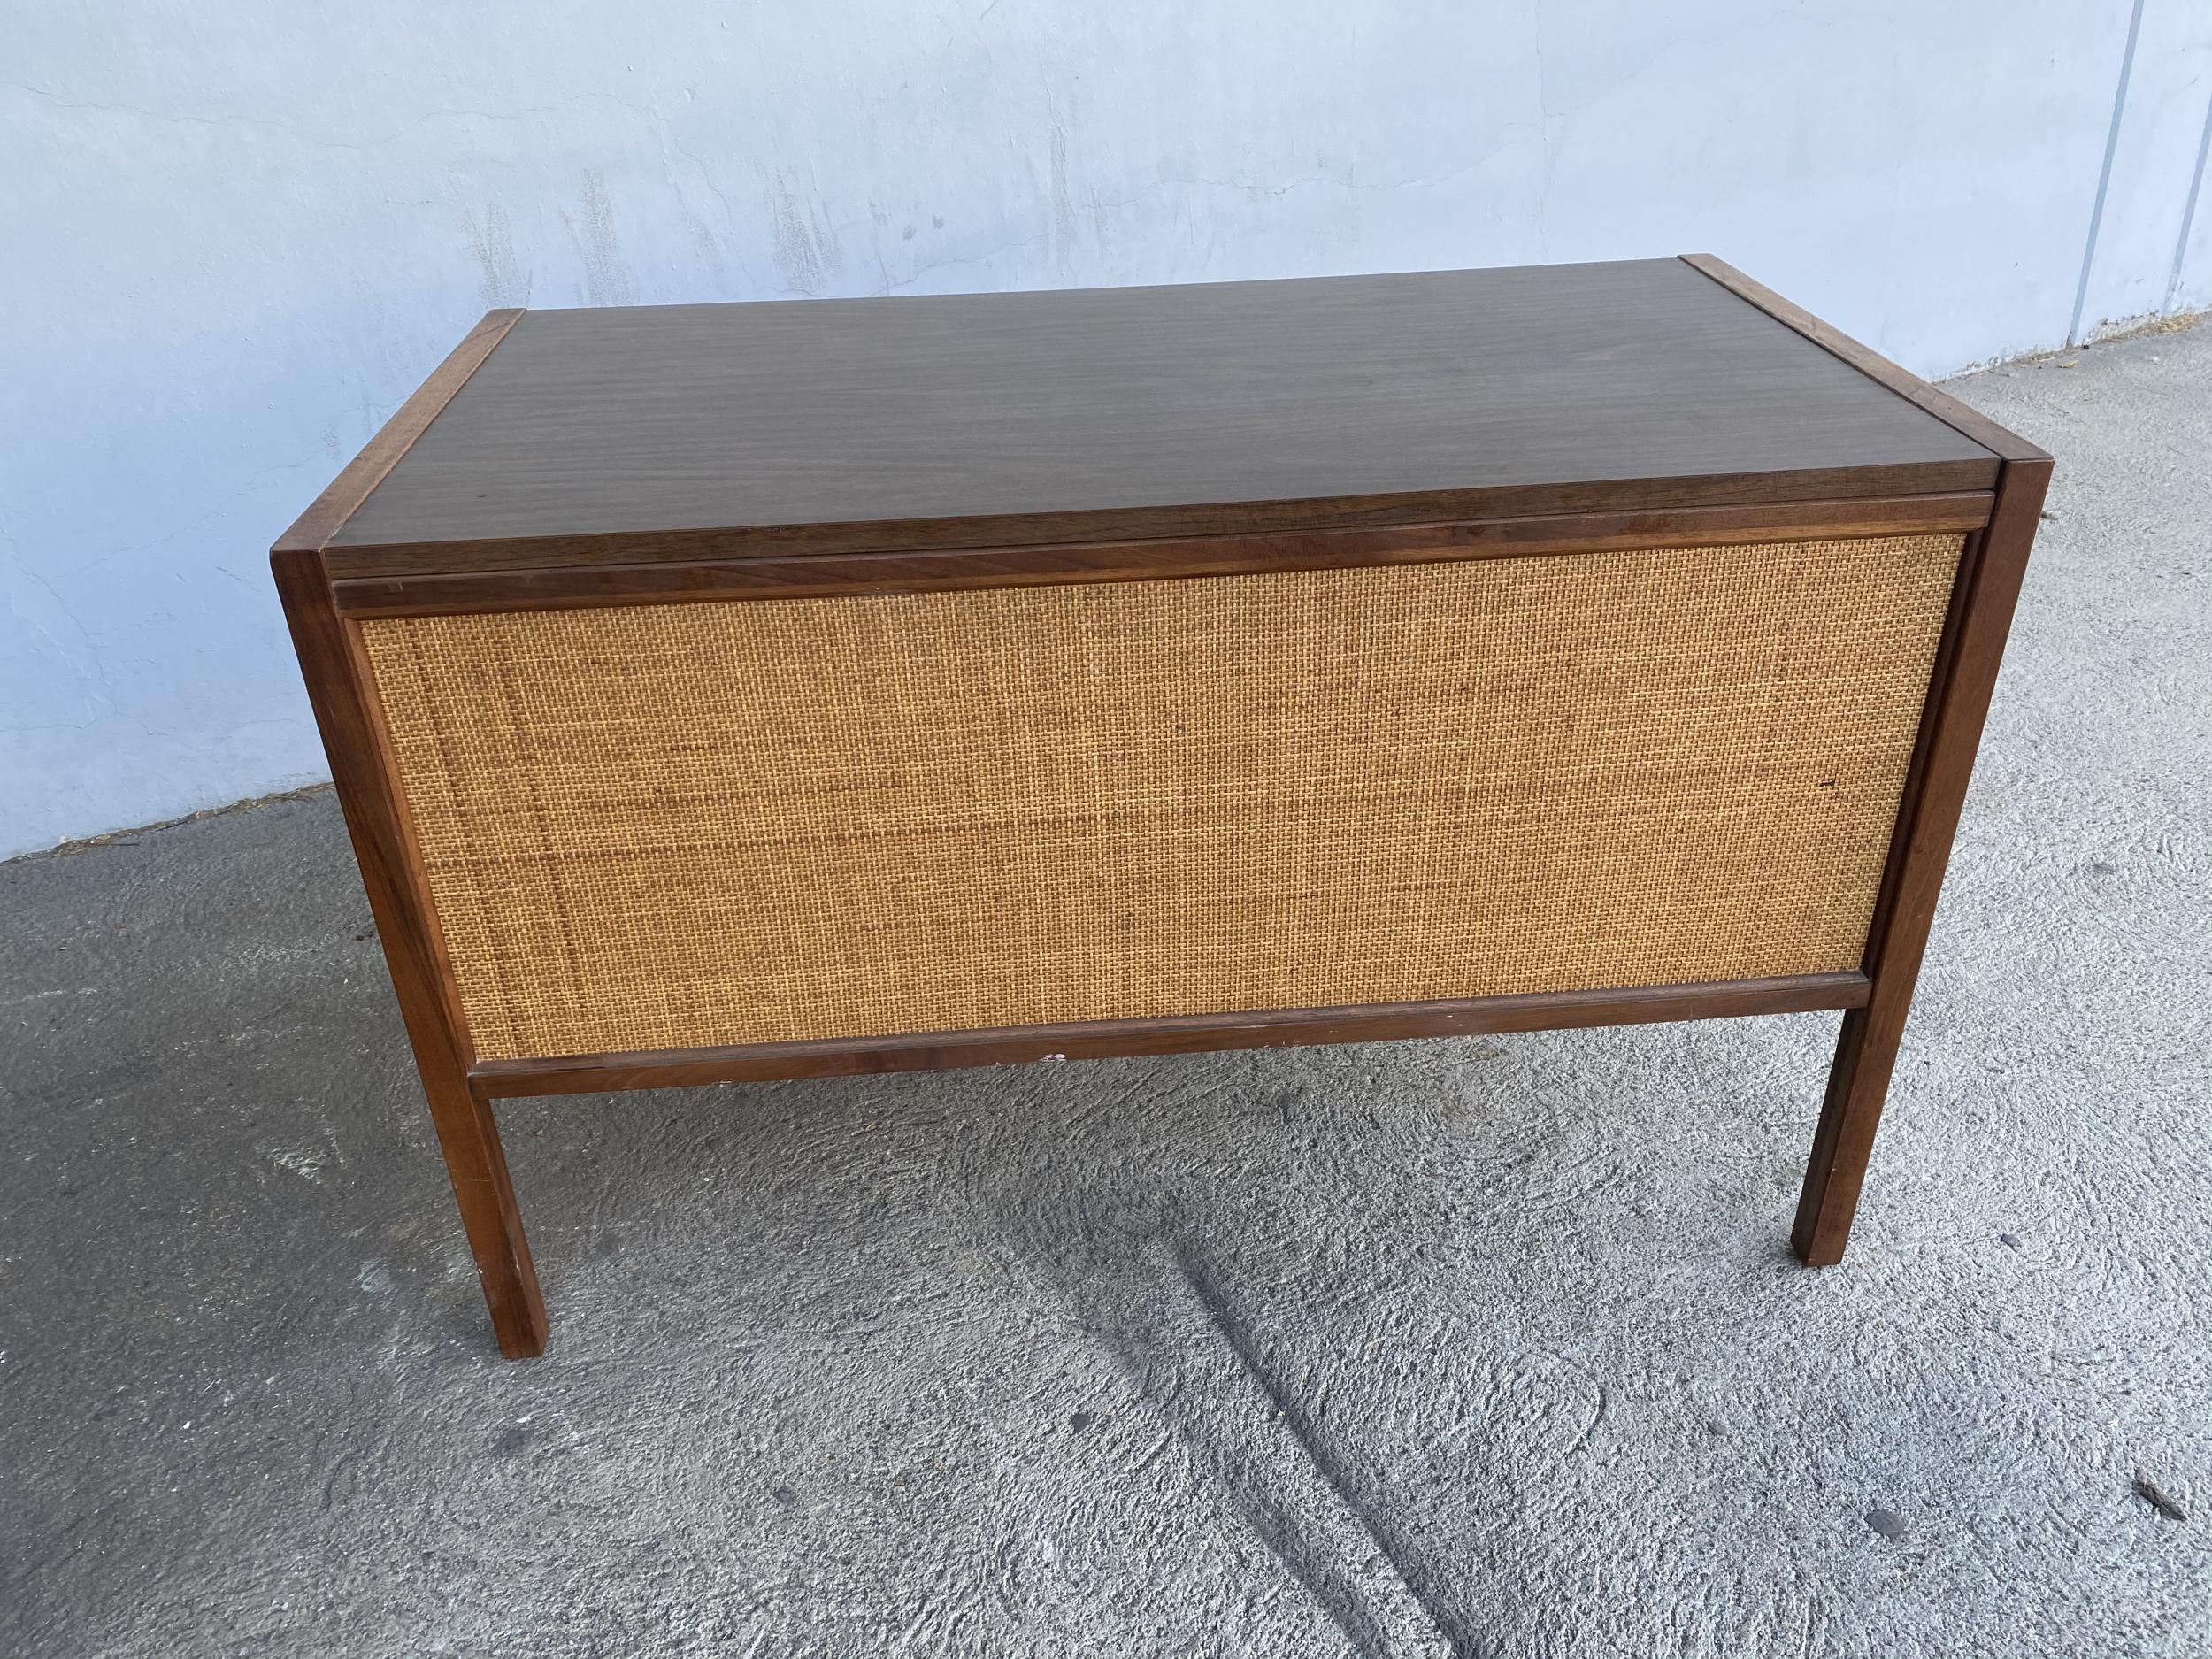 Original 1960s Danish modern style teak writing desk with woven wicker front and dark stained carved teak drawer pulls. The desk features 6 pull out drawers.

Branded: Sligh Lowry.